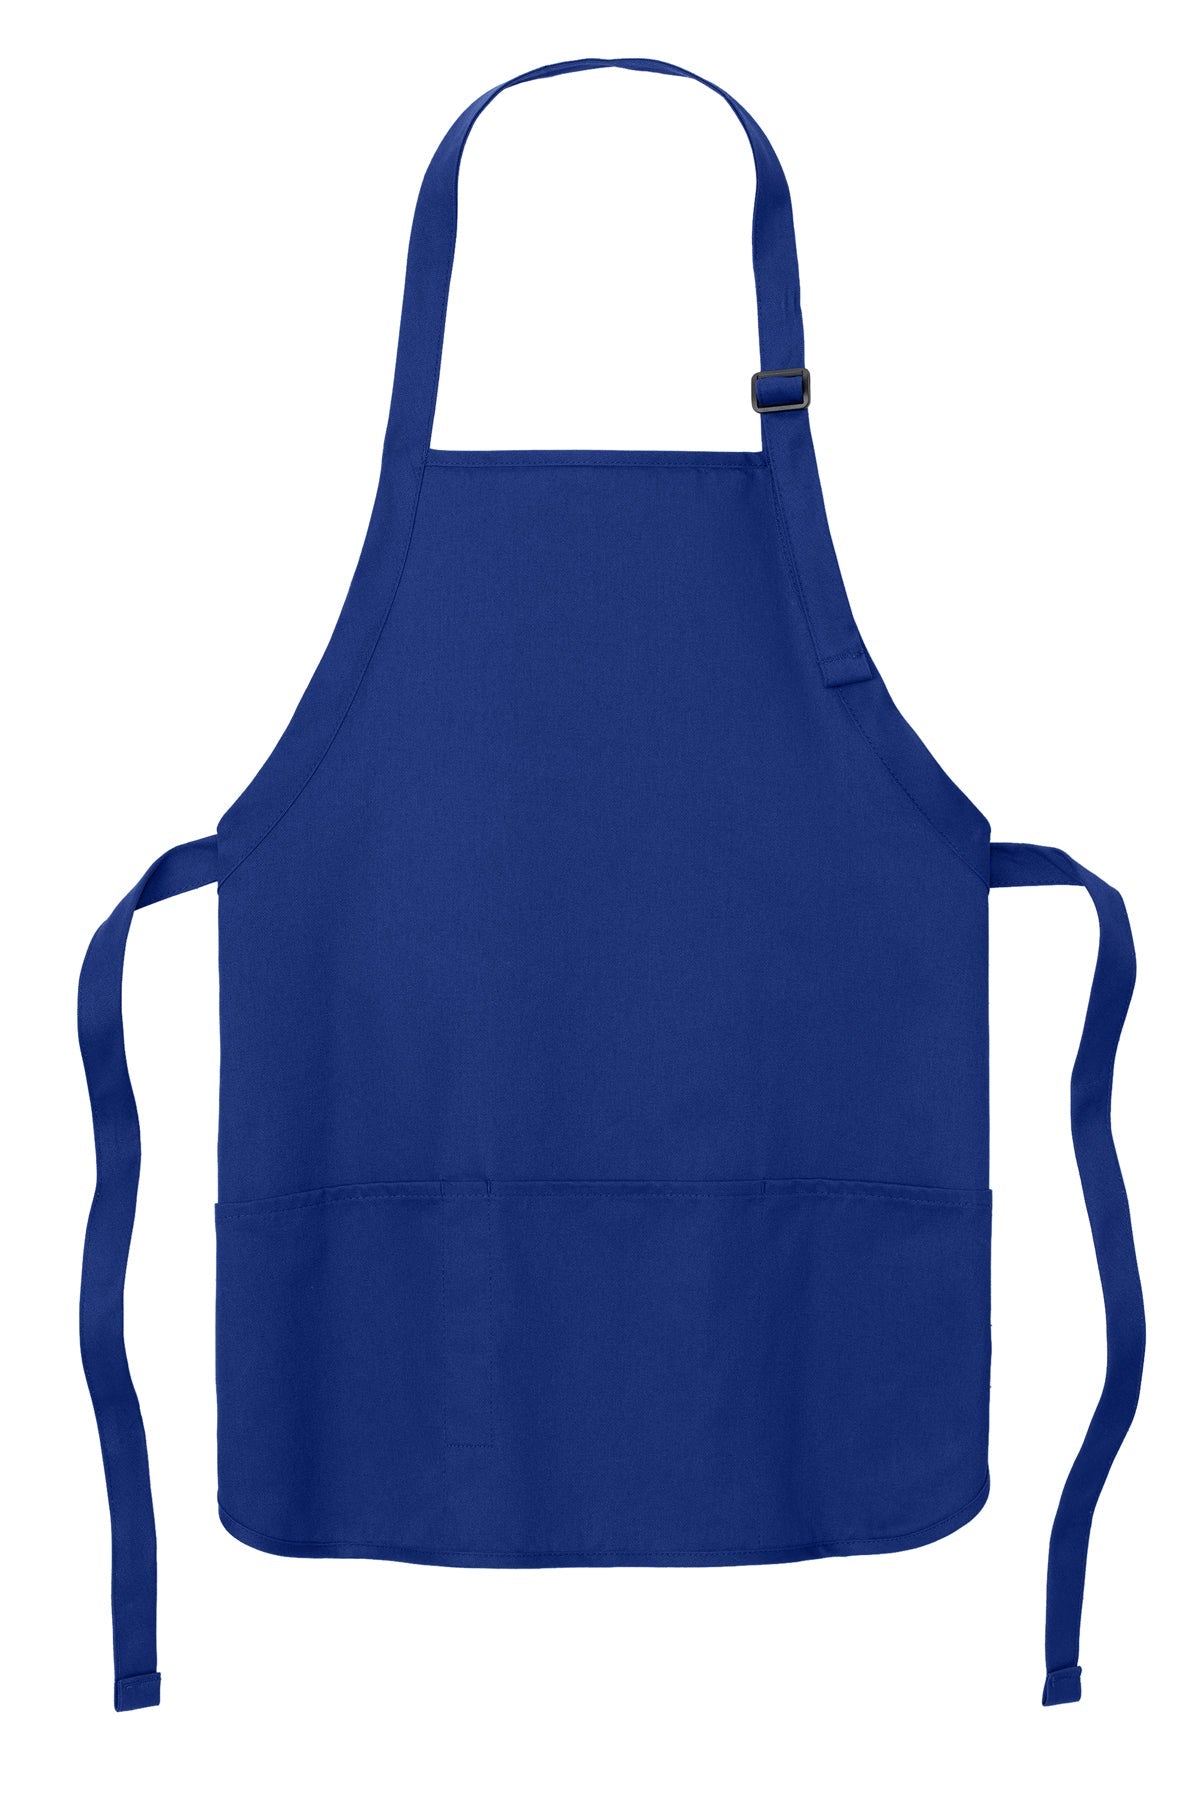 Port Authority Medium-Length Apron with Pouch Pockets A510 Royal